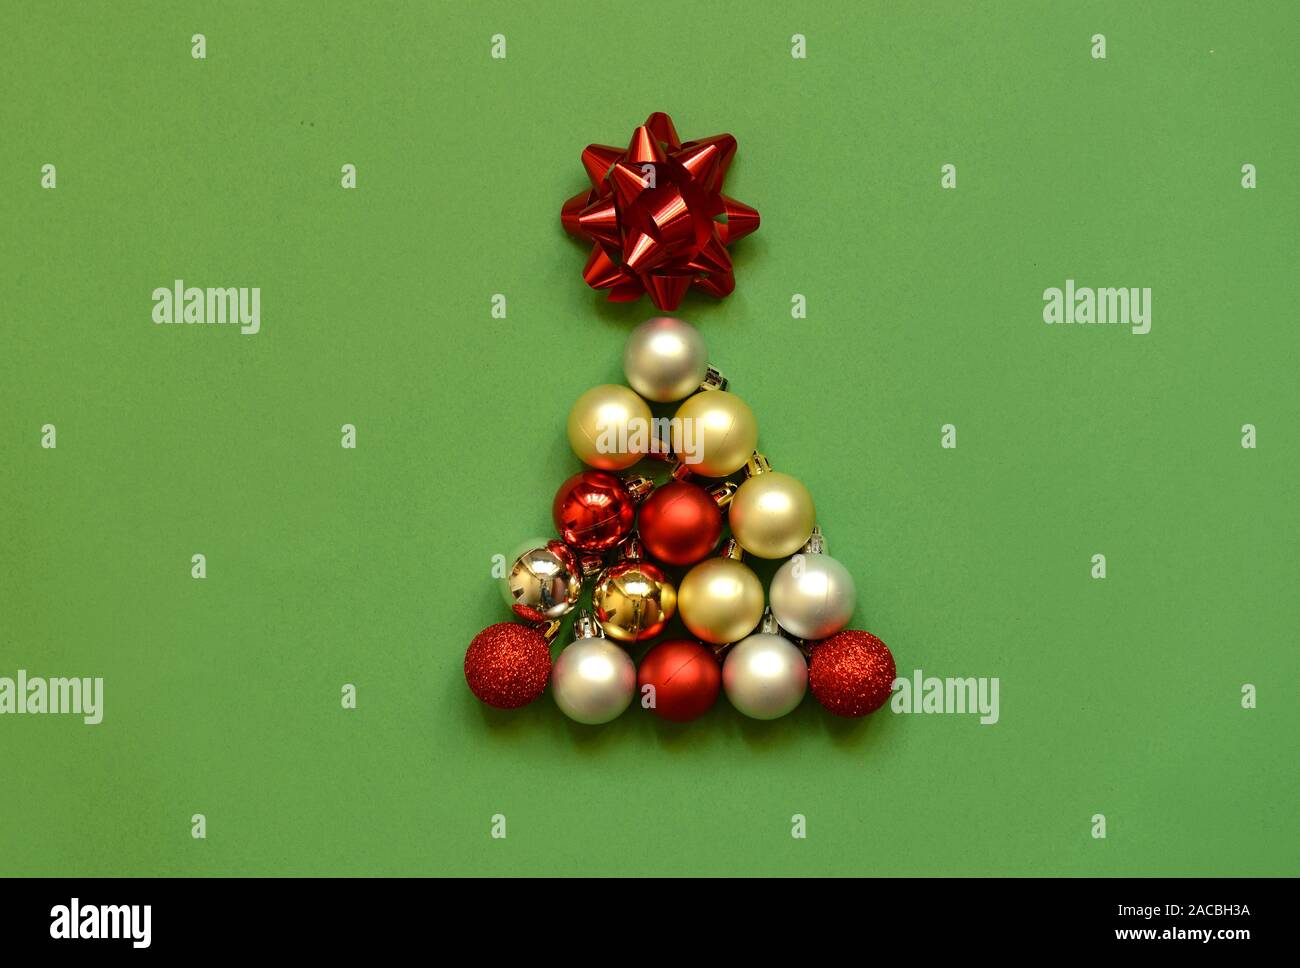 Christmas tree shape made with bauble on green background. Minimal holiday concept. Creative flat lay. Stock Photo